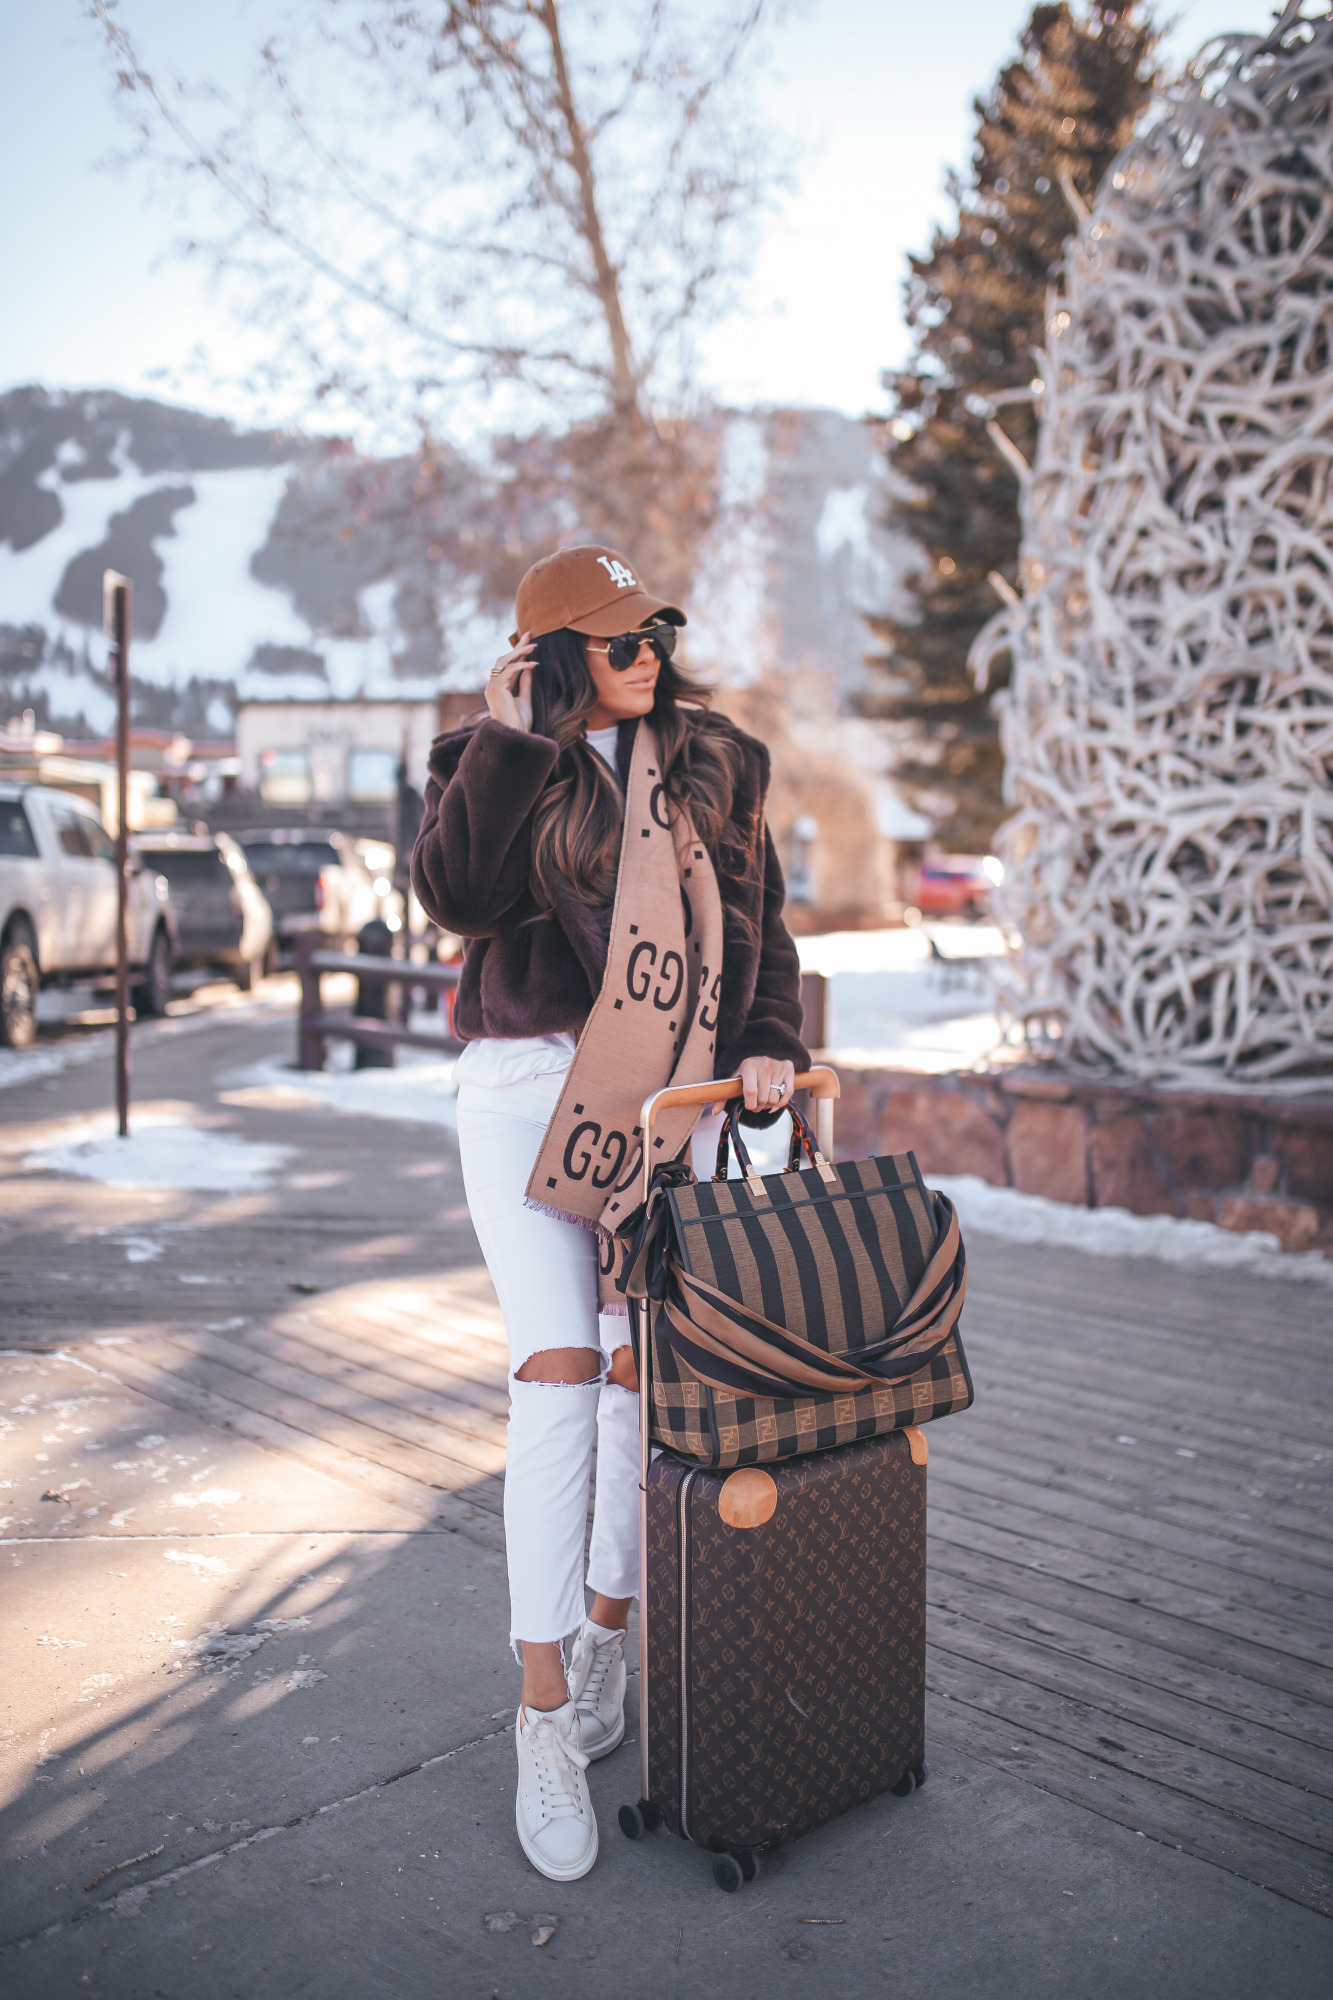 winter fashion outfit idea pinterest 2021, white denim in winter, louis vuitton horizon 55 carry on |Winter Fashion by popular US fashion blog, The Sweetest Thing: image of Emily Gemma standing outside in downtown Jackson Hole, WY and wearing a Free People top, BB Dakota faux fur jacket, distressed white denim jeans, Gucci scarf, '47 brand cap, Le Specs sunglasses, and standing next to a Louis Vuitton rolling suitcase and holding a Fendi tote bag. 